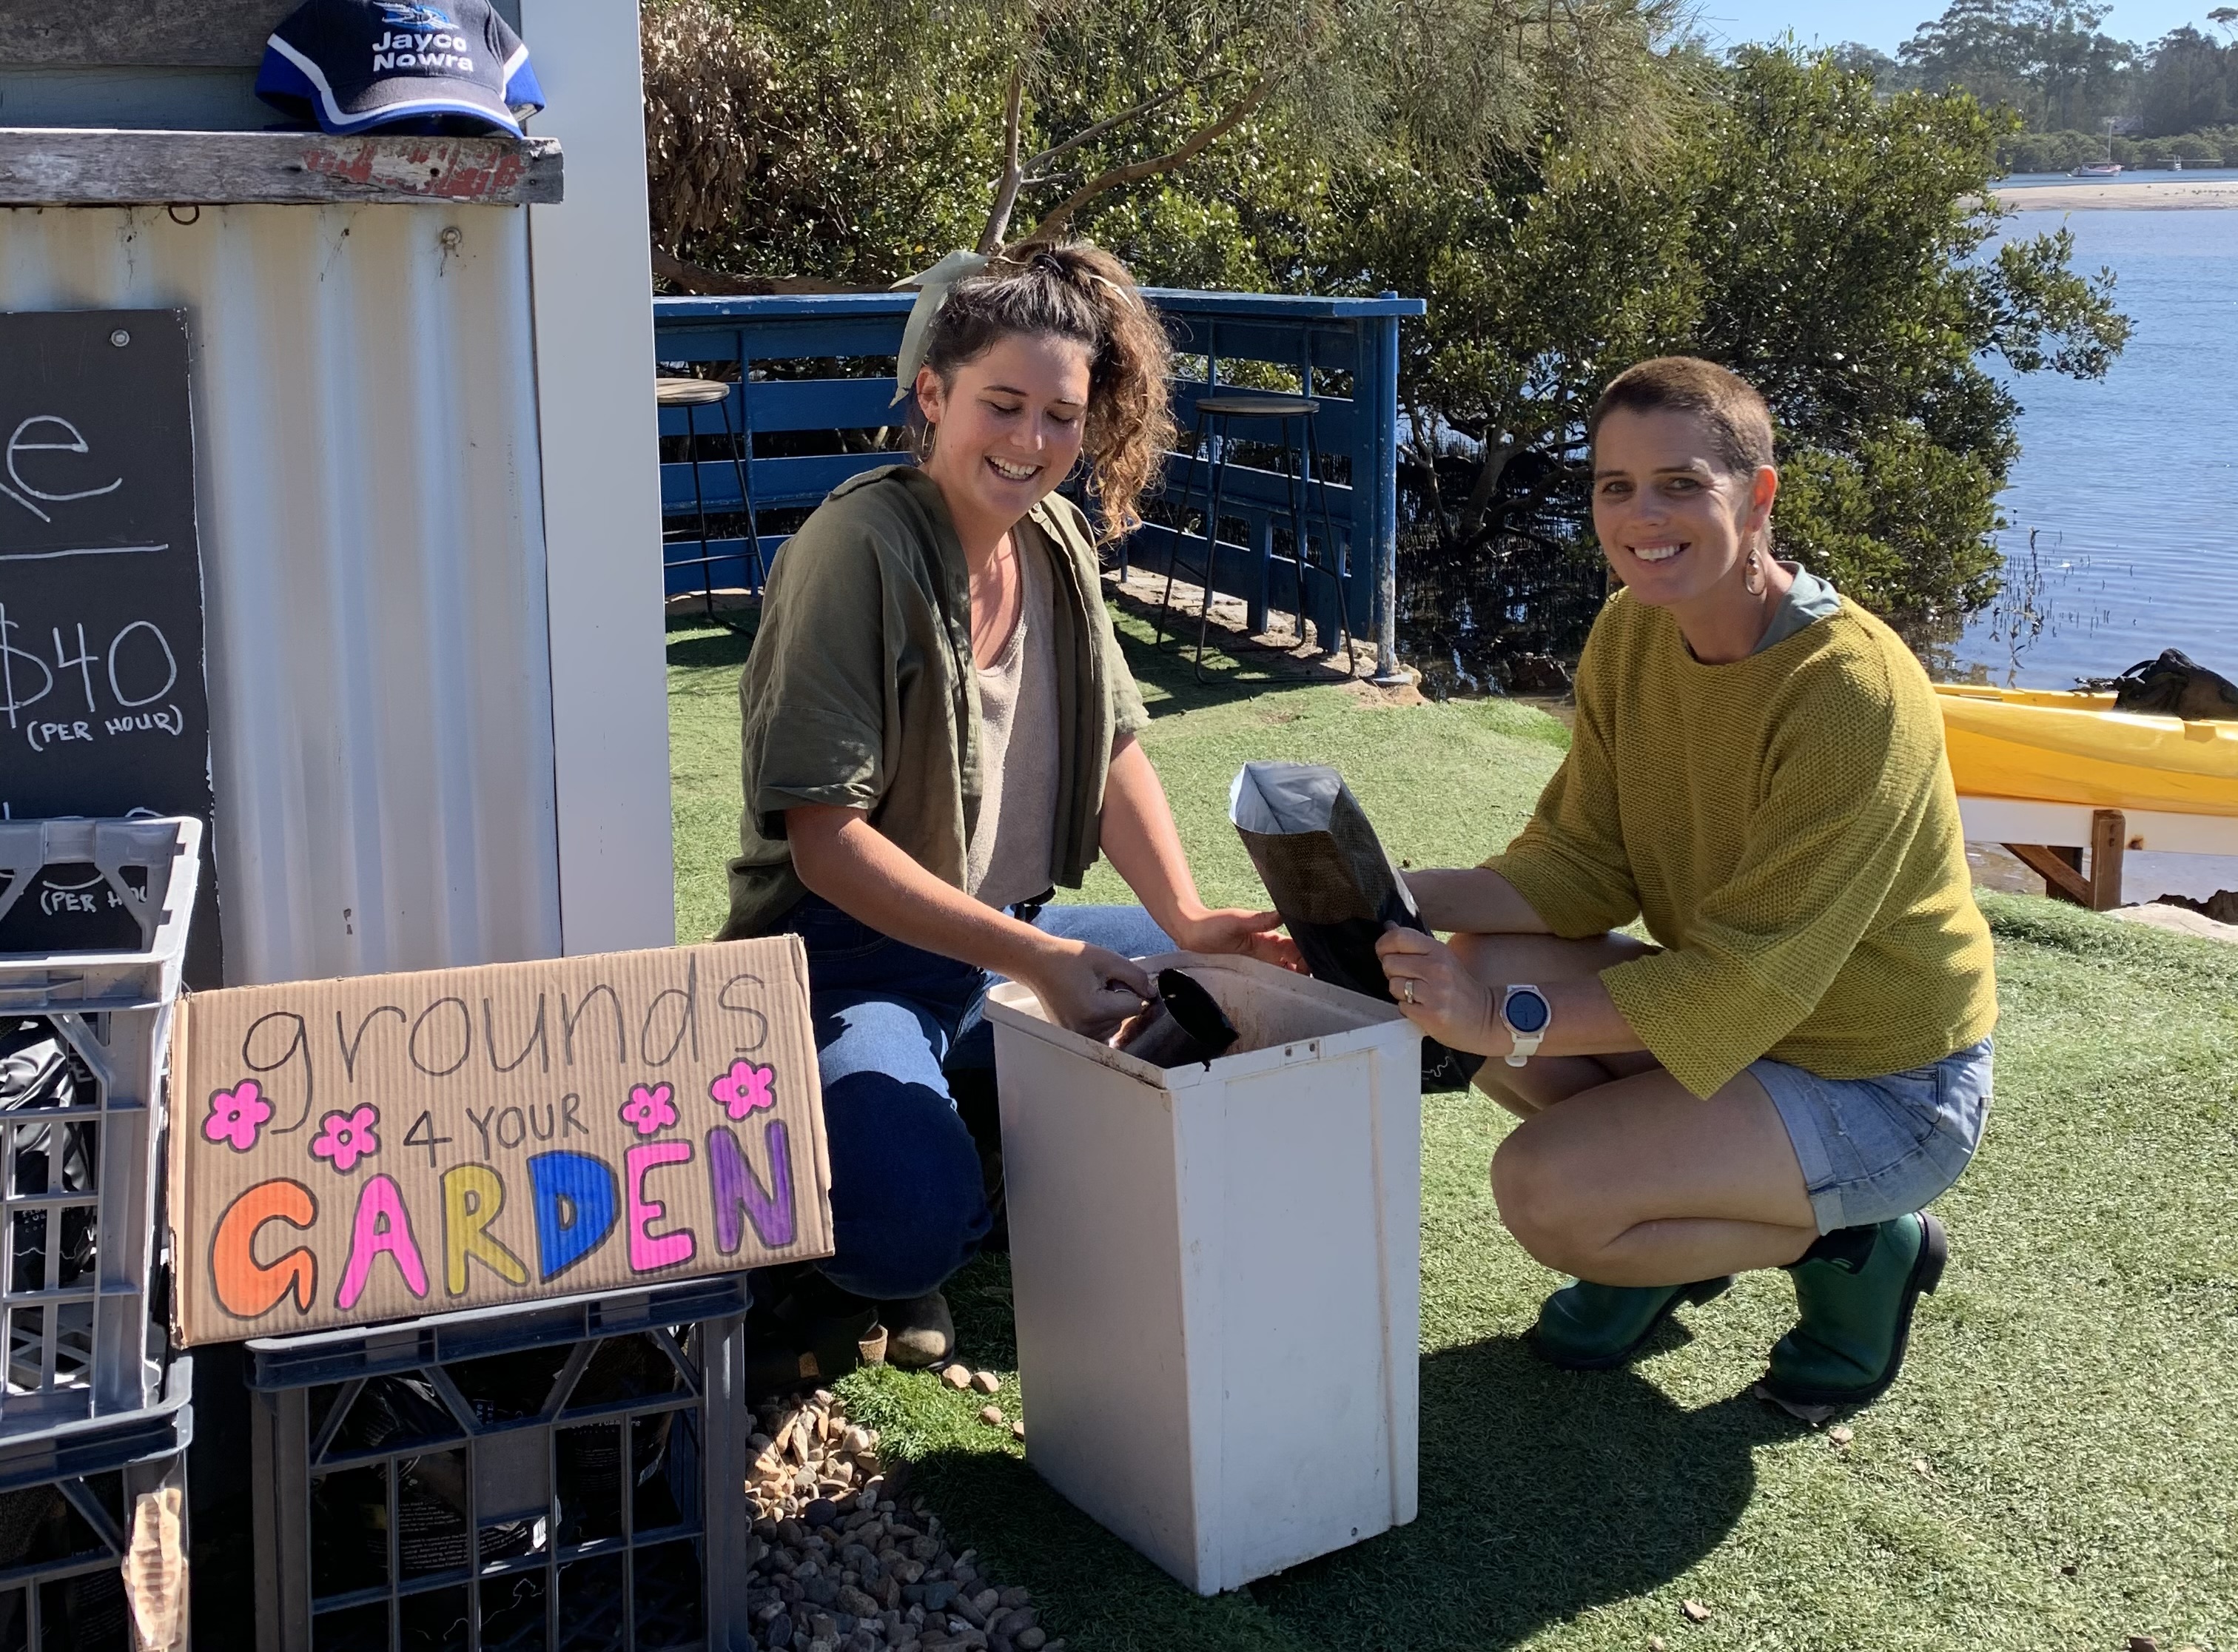 Eateries, schools and community to help reduce food waste in the Eurobodalla